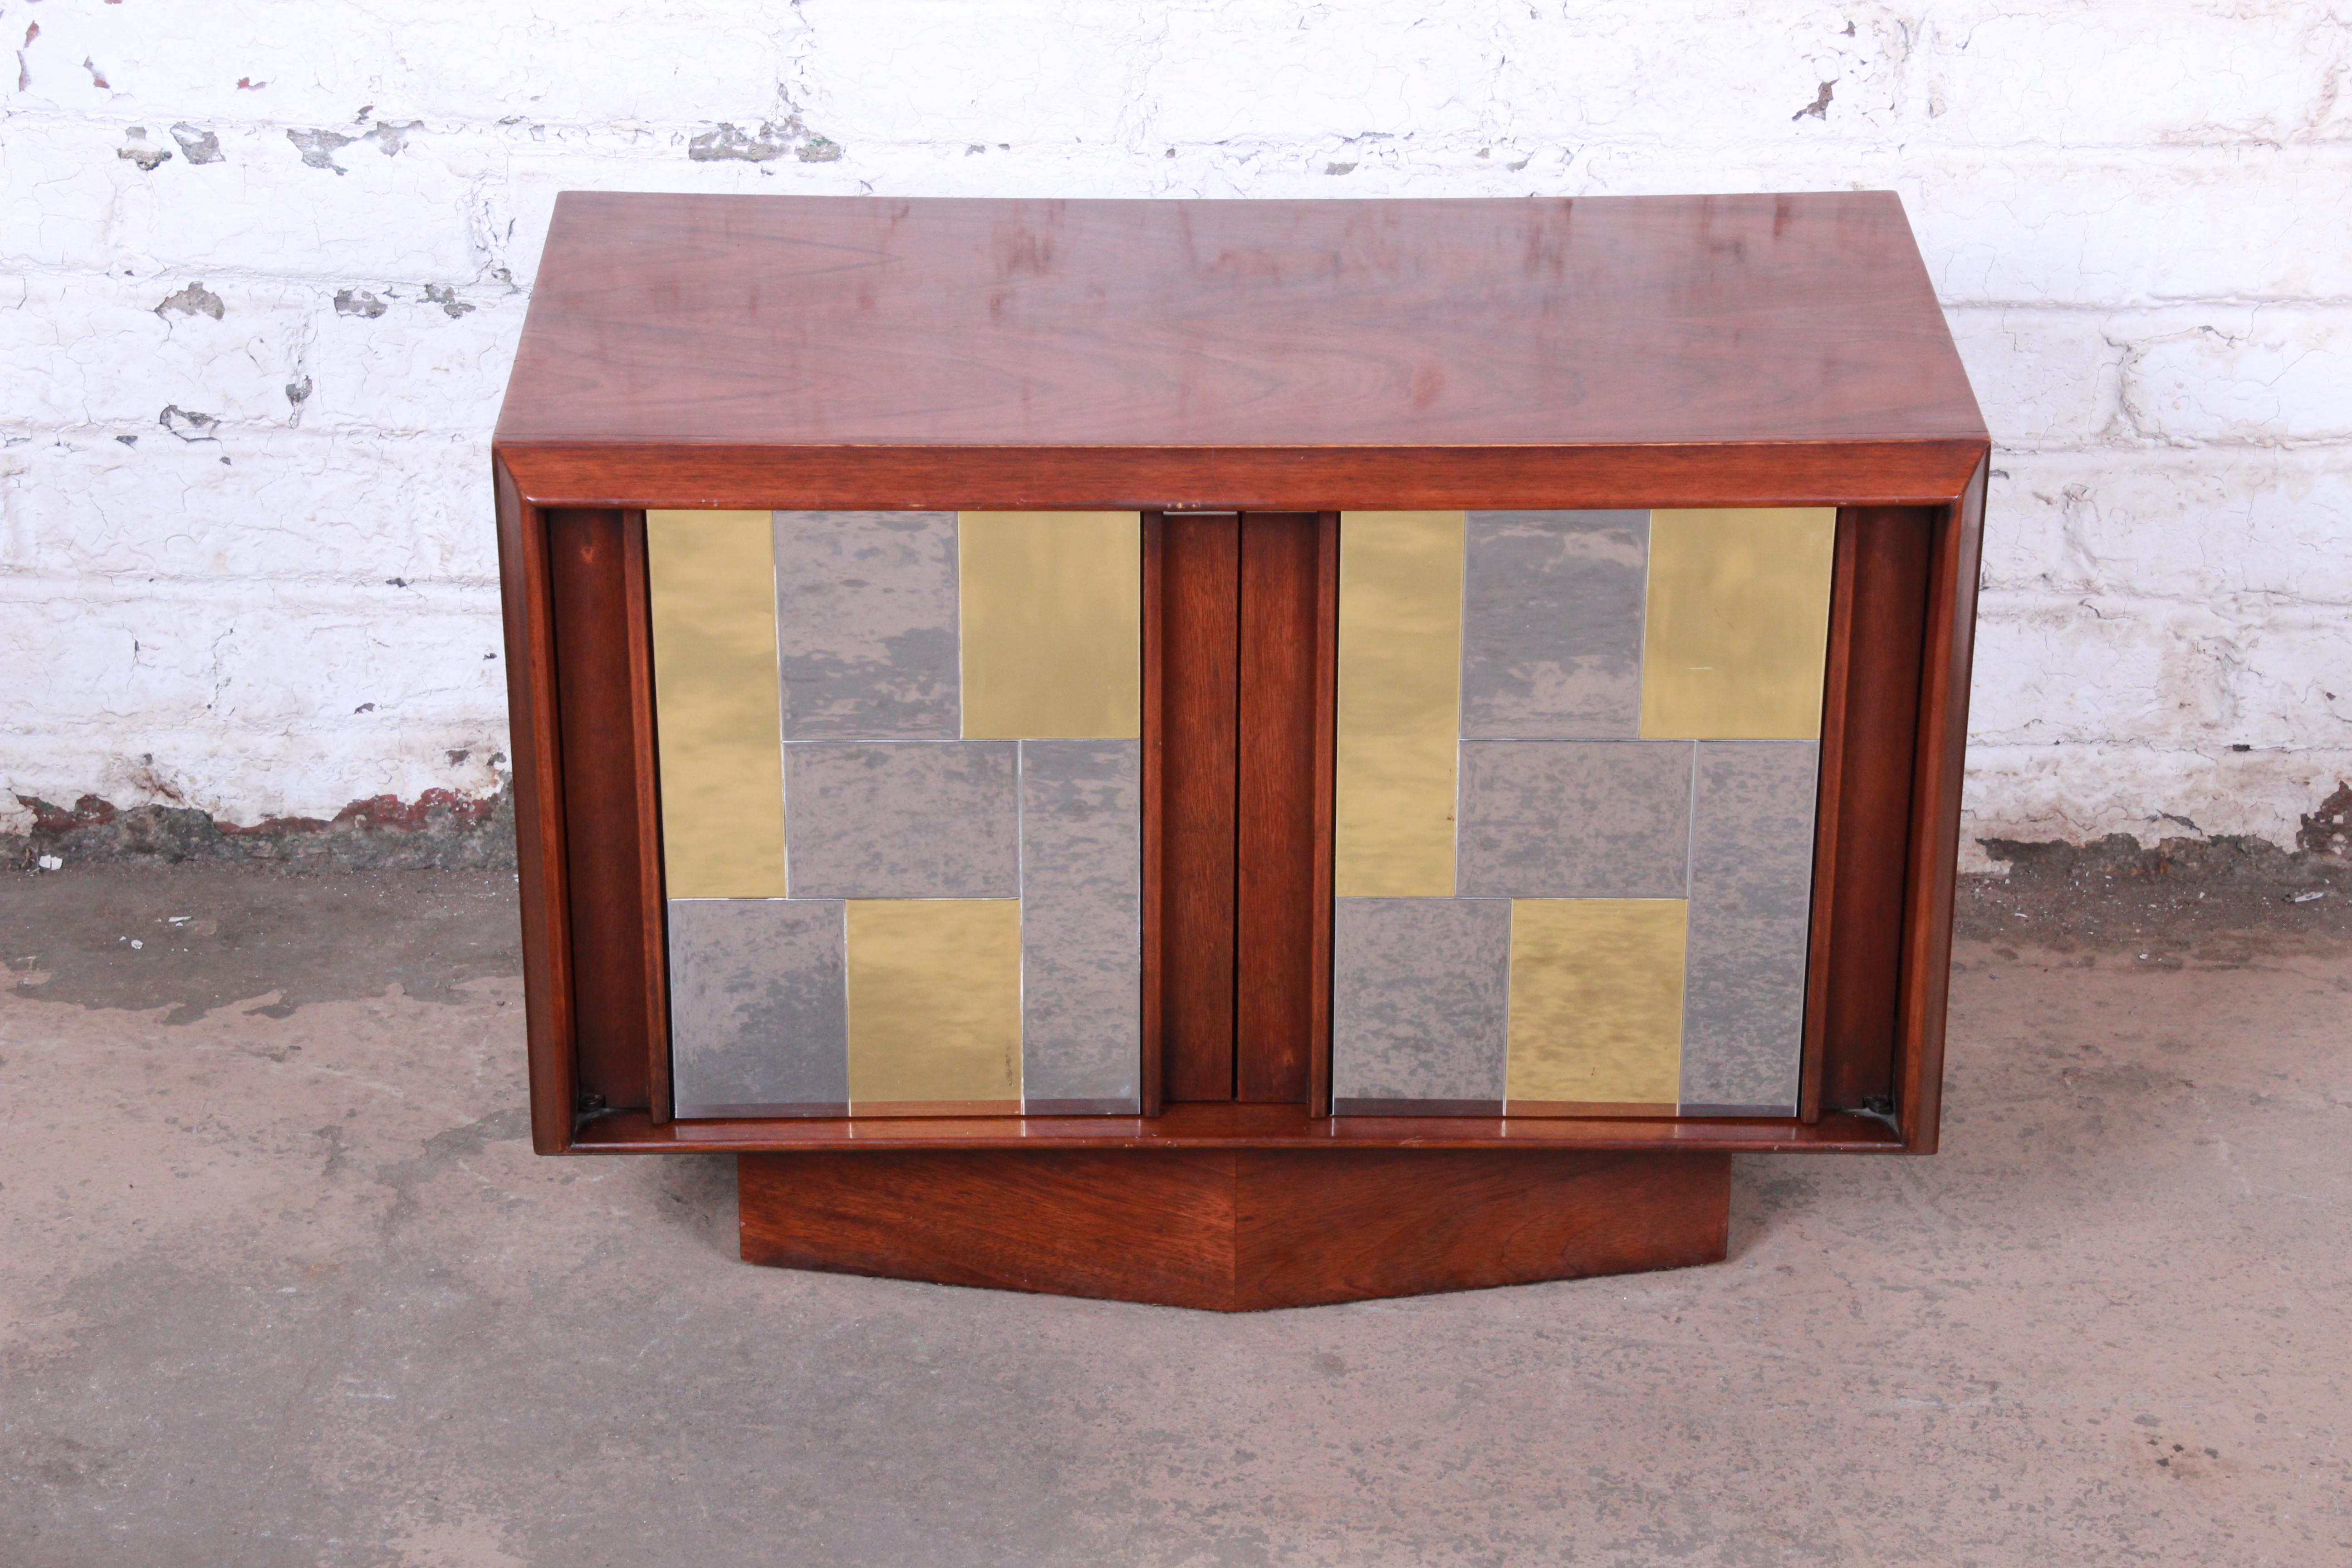 An exceptional Mid-Century Modern cabinet or nightstand by Lane Furniture in the style of the Cityscape line by Paul Evans. The cabinet features gorgeous walnut wood grain, with a unique patchwork design in chrome and brass. It offers good storage,